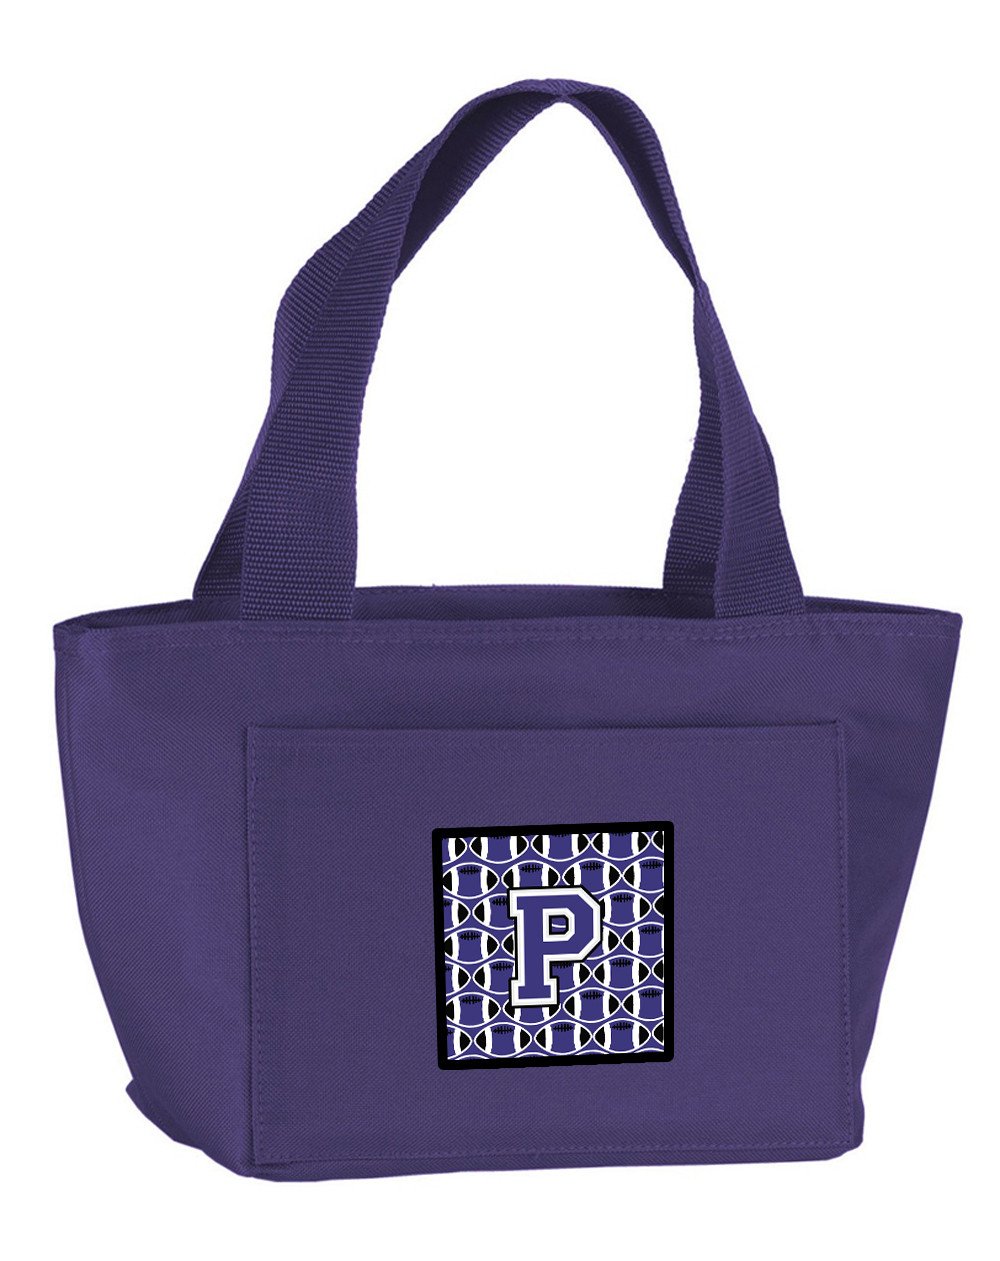 Letter P Football Purple and White Lunch Bag CJ1068-PPR-8808 by Caroline's Treasures